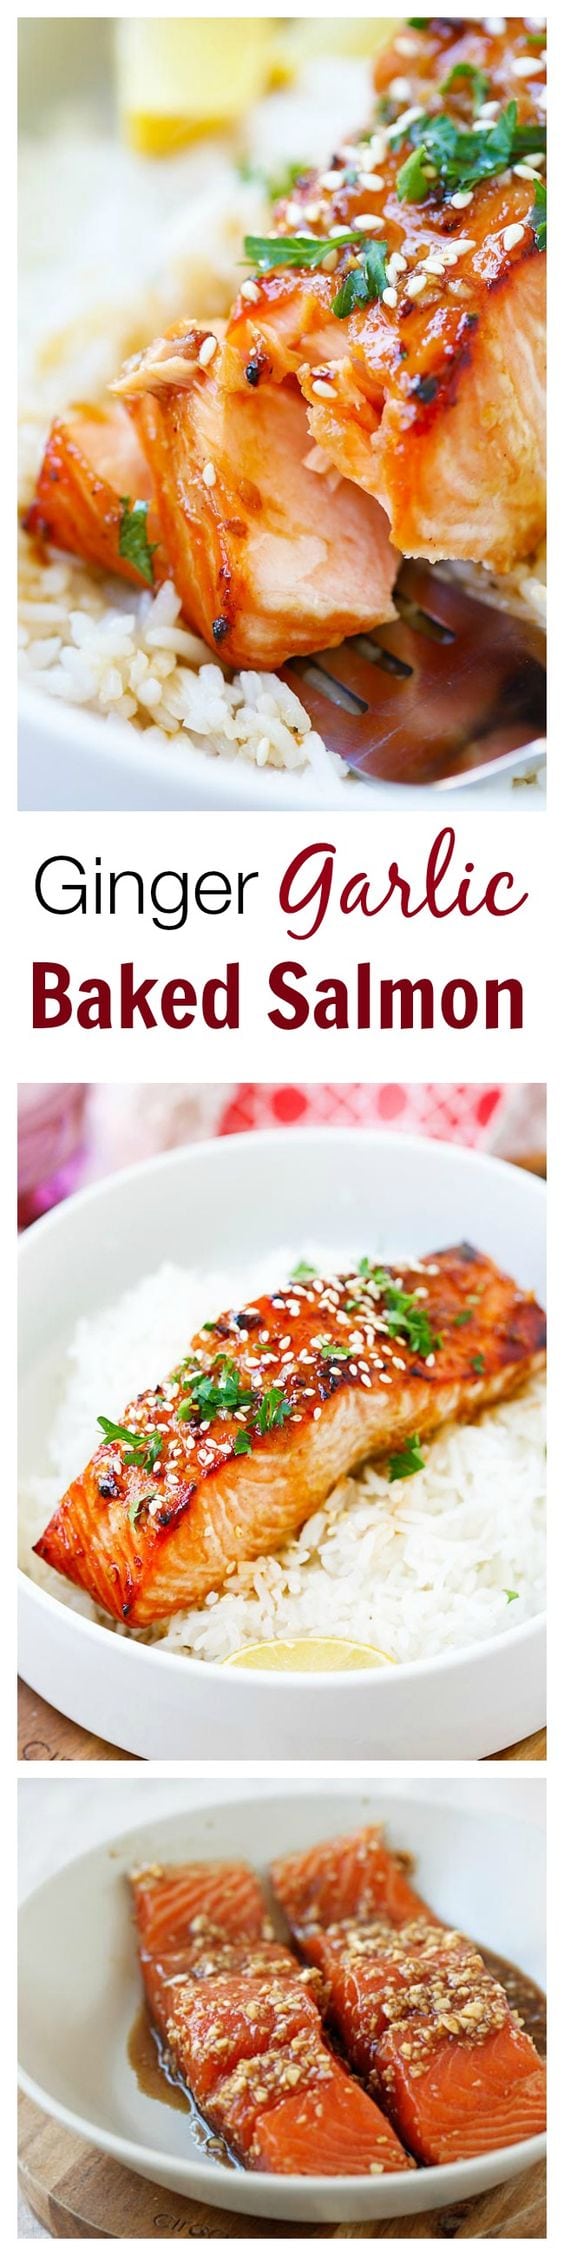 Ginger Garlic Baked Salmon – the best and easiest salmon recipe ever! Moist, flavorful, juicy, and takes only 10 mins to prep. So good you want seconds!! | rasamalaysia.com